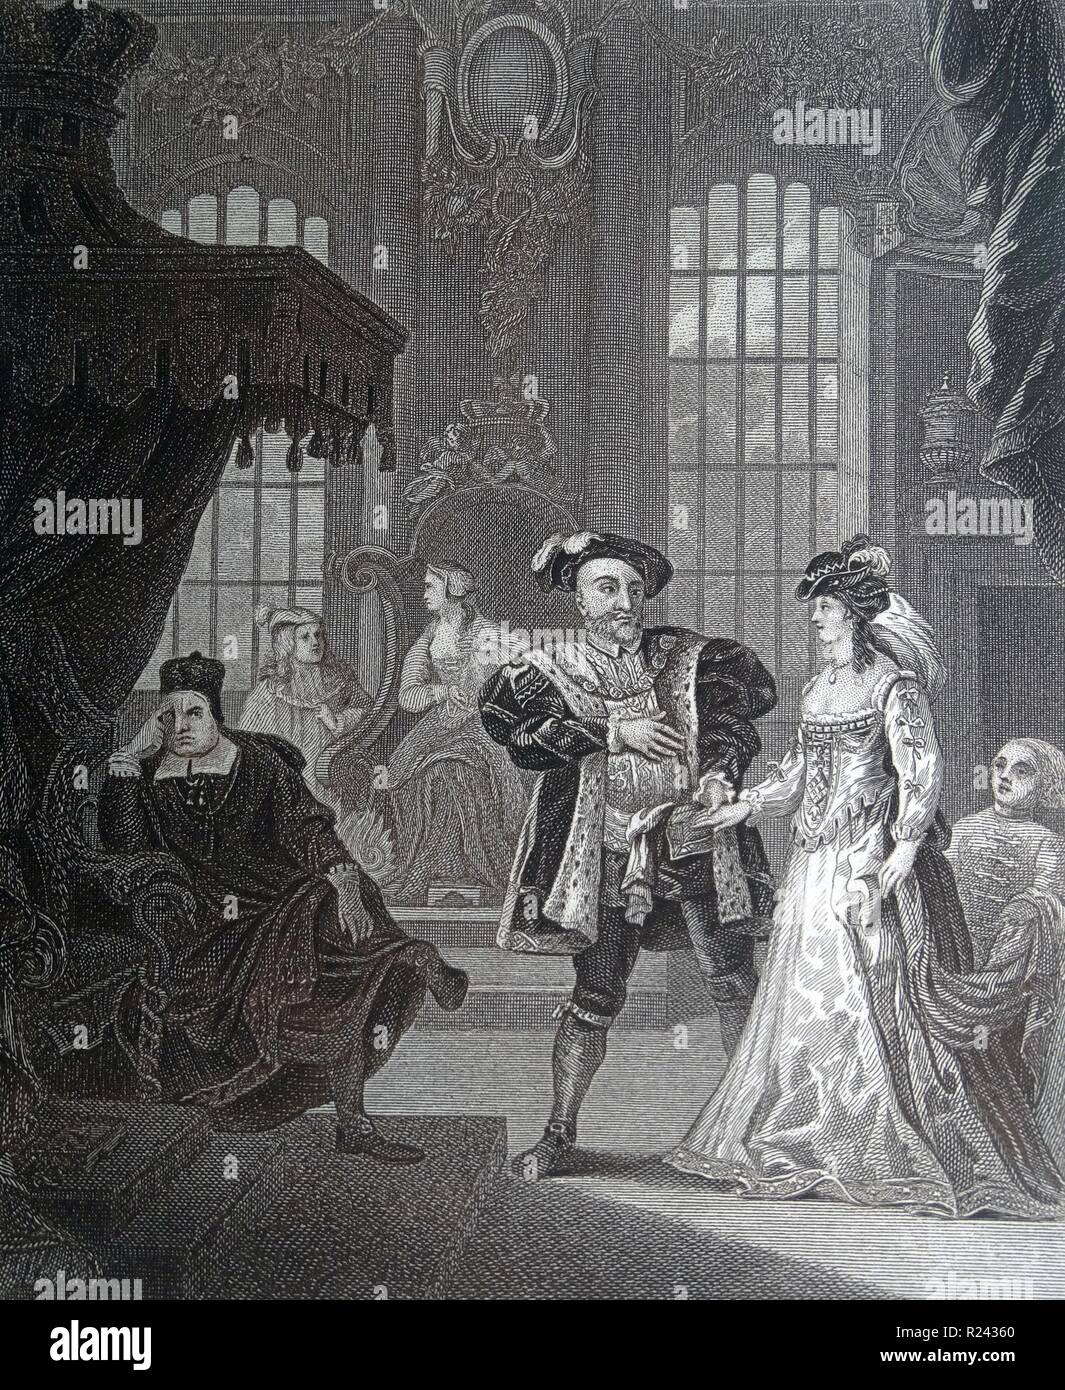 Engraving by British artist & engraver, William Hogarth 1697-1764: King Henry the Eighth & Anna Bullen (Anne Boleyn). Henry confesses the lady-in-waiting of his (1st) wife, Catherine of Aragon, this set back on the throne, his feelings. To the right the almighty cardinal Thomas Wolsey. Engraving by Thomas Cook (c. 1744-1818). Stock Photo